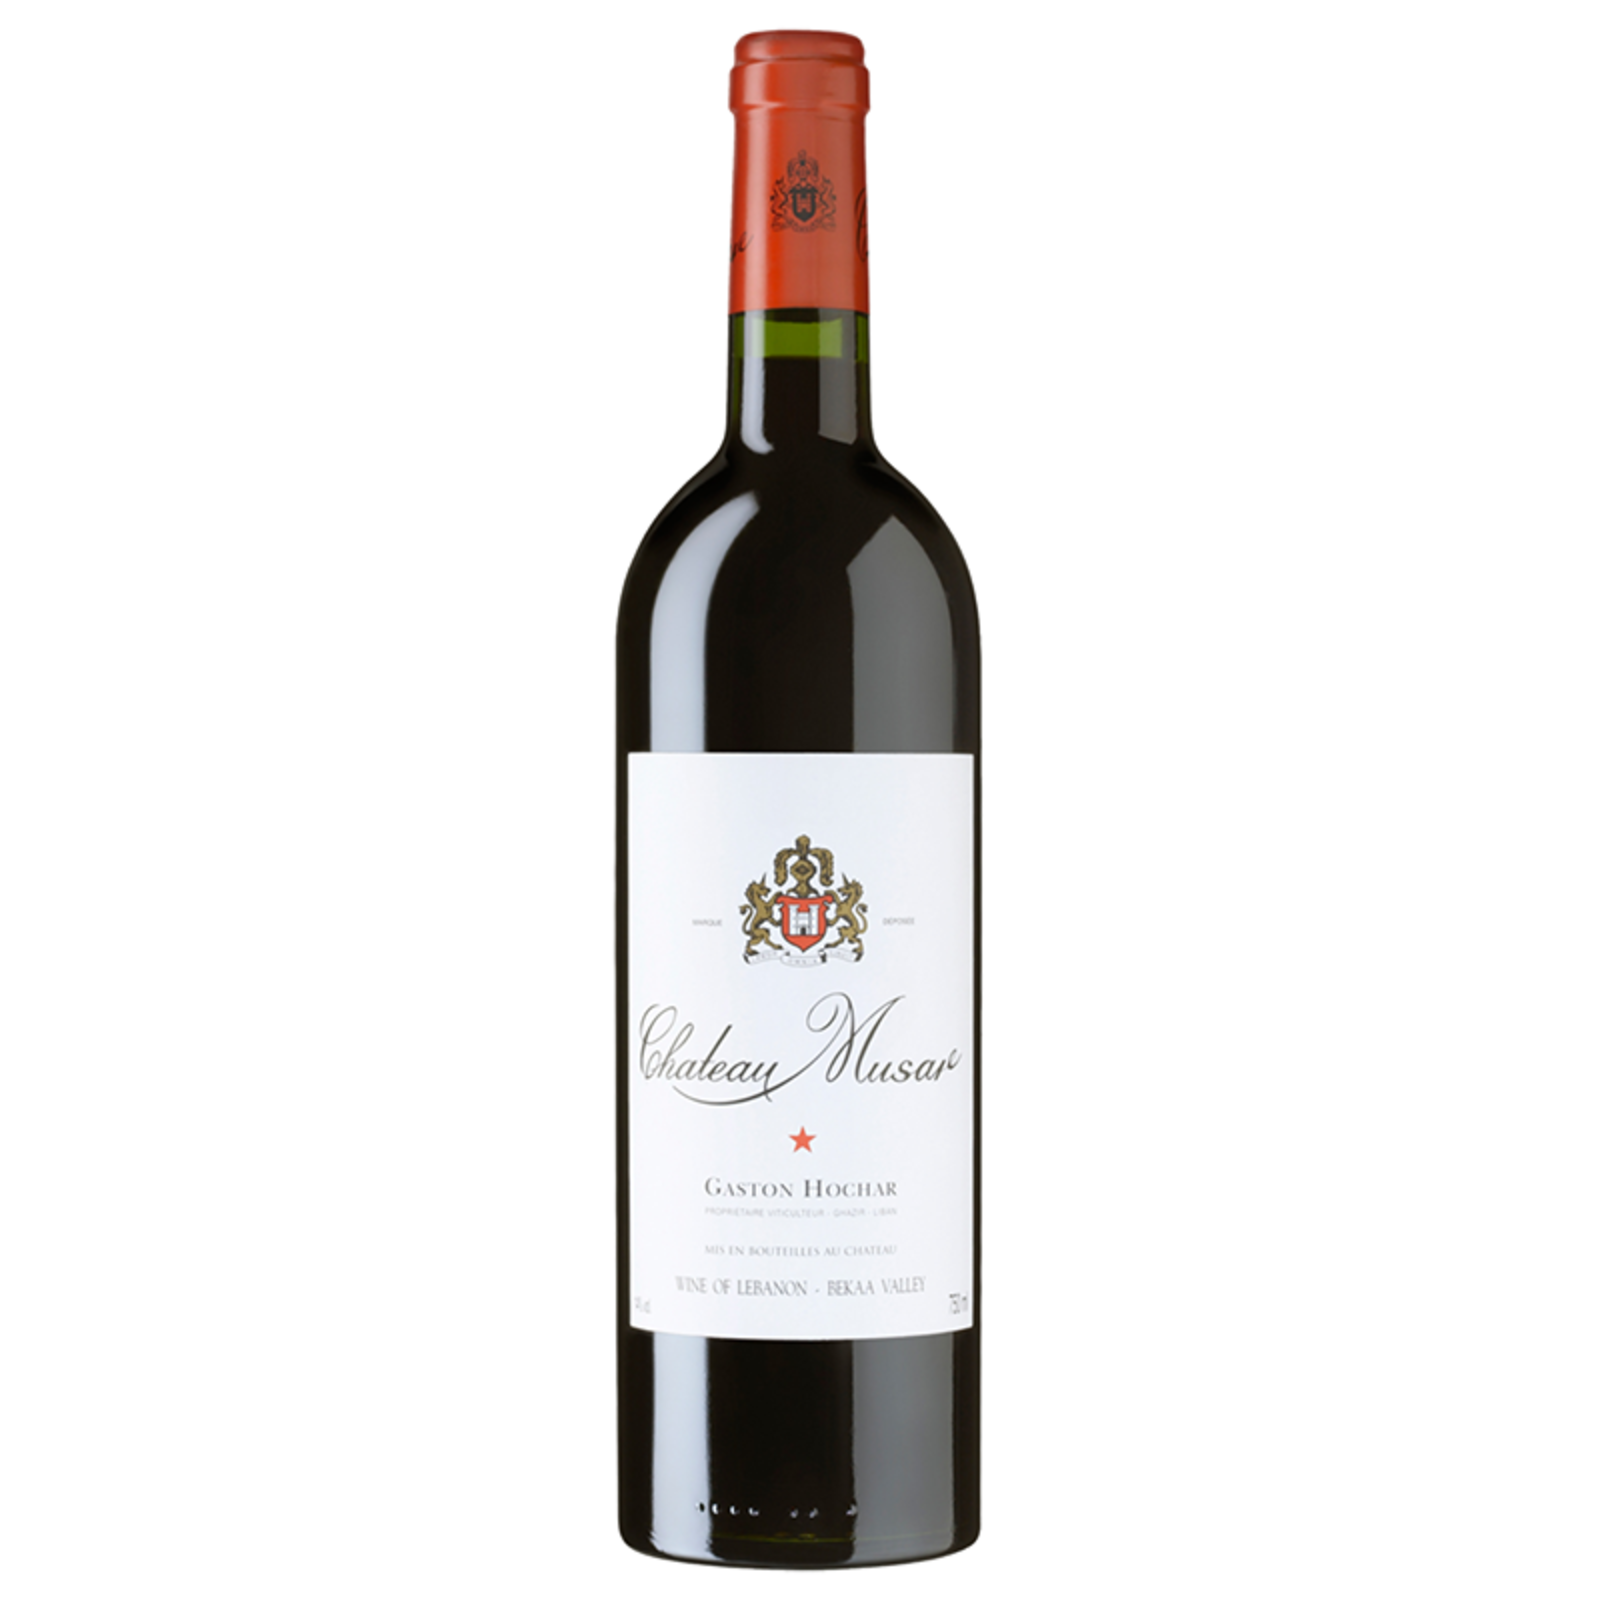 Chateau Musar Chateau Musar Bekaa Valley 2010